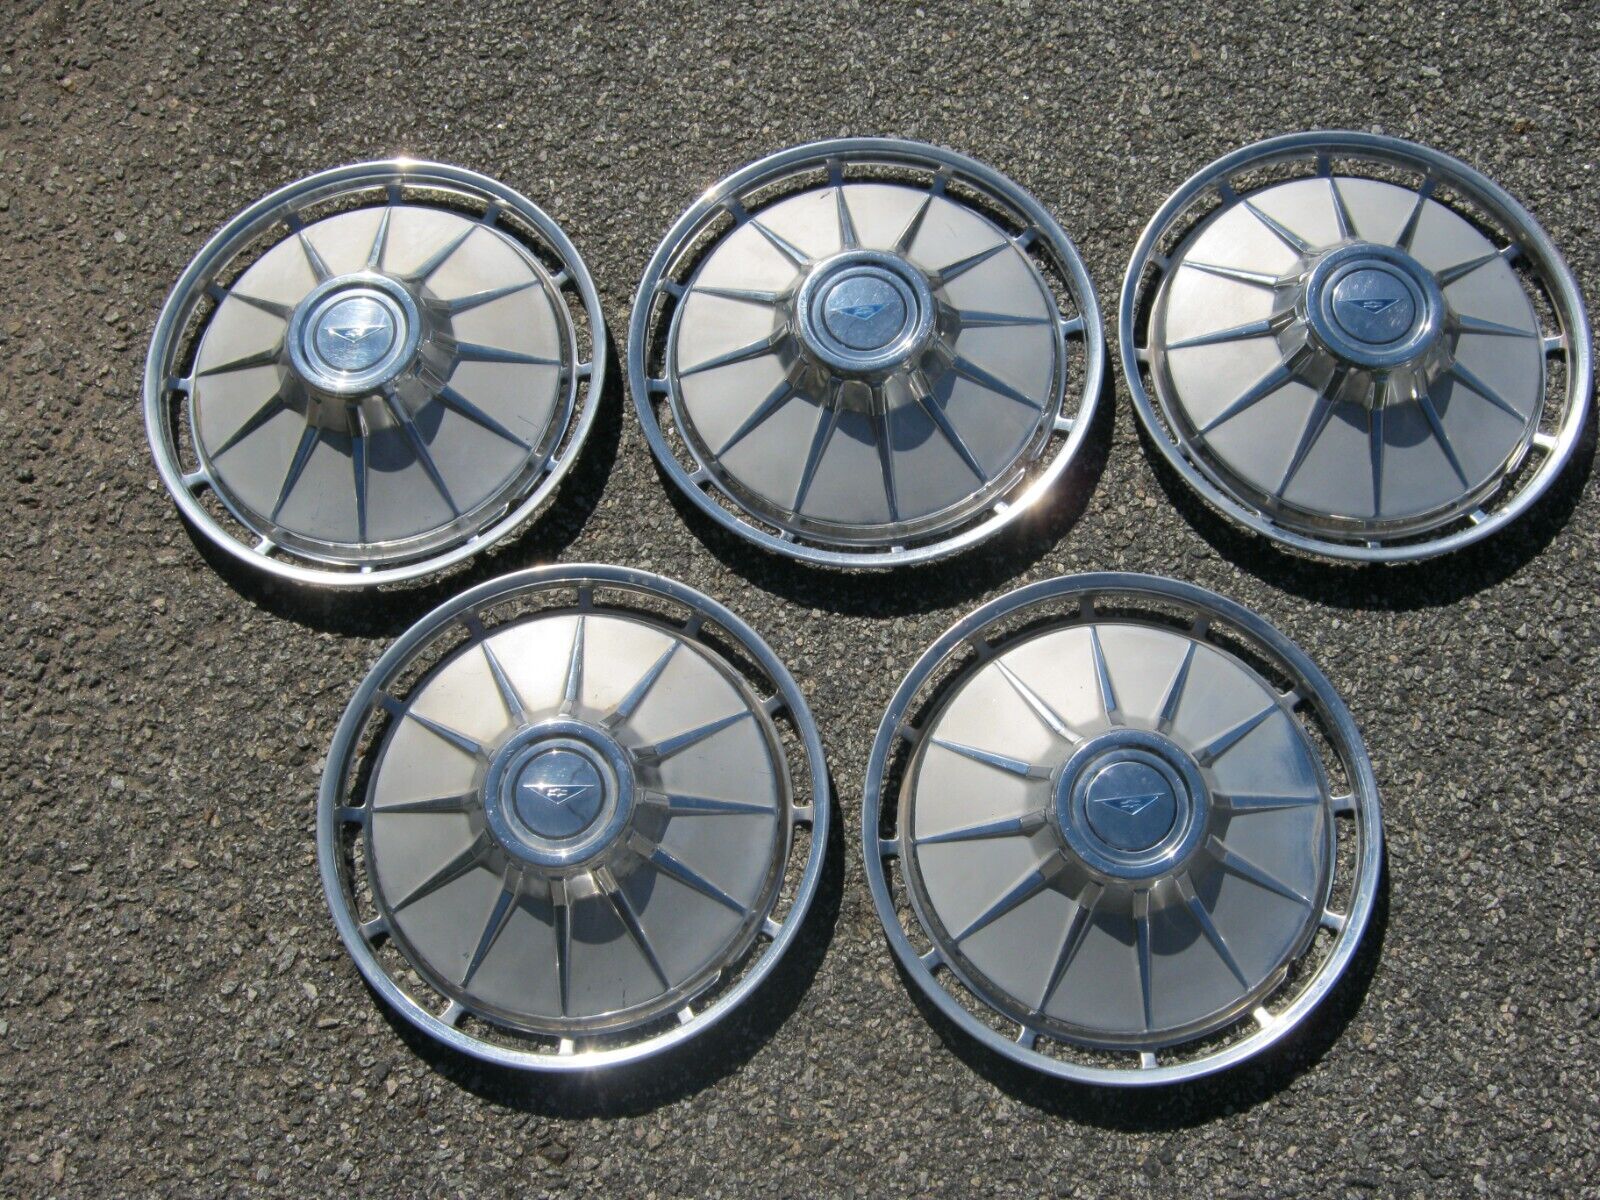 Factory 1961 Chevy Corvair Monza 13 inch hubcaps wheel covers